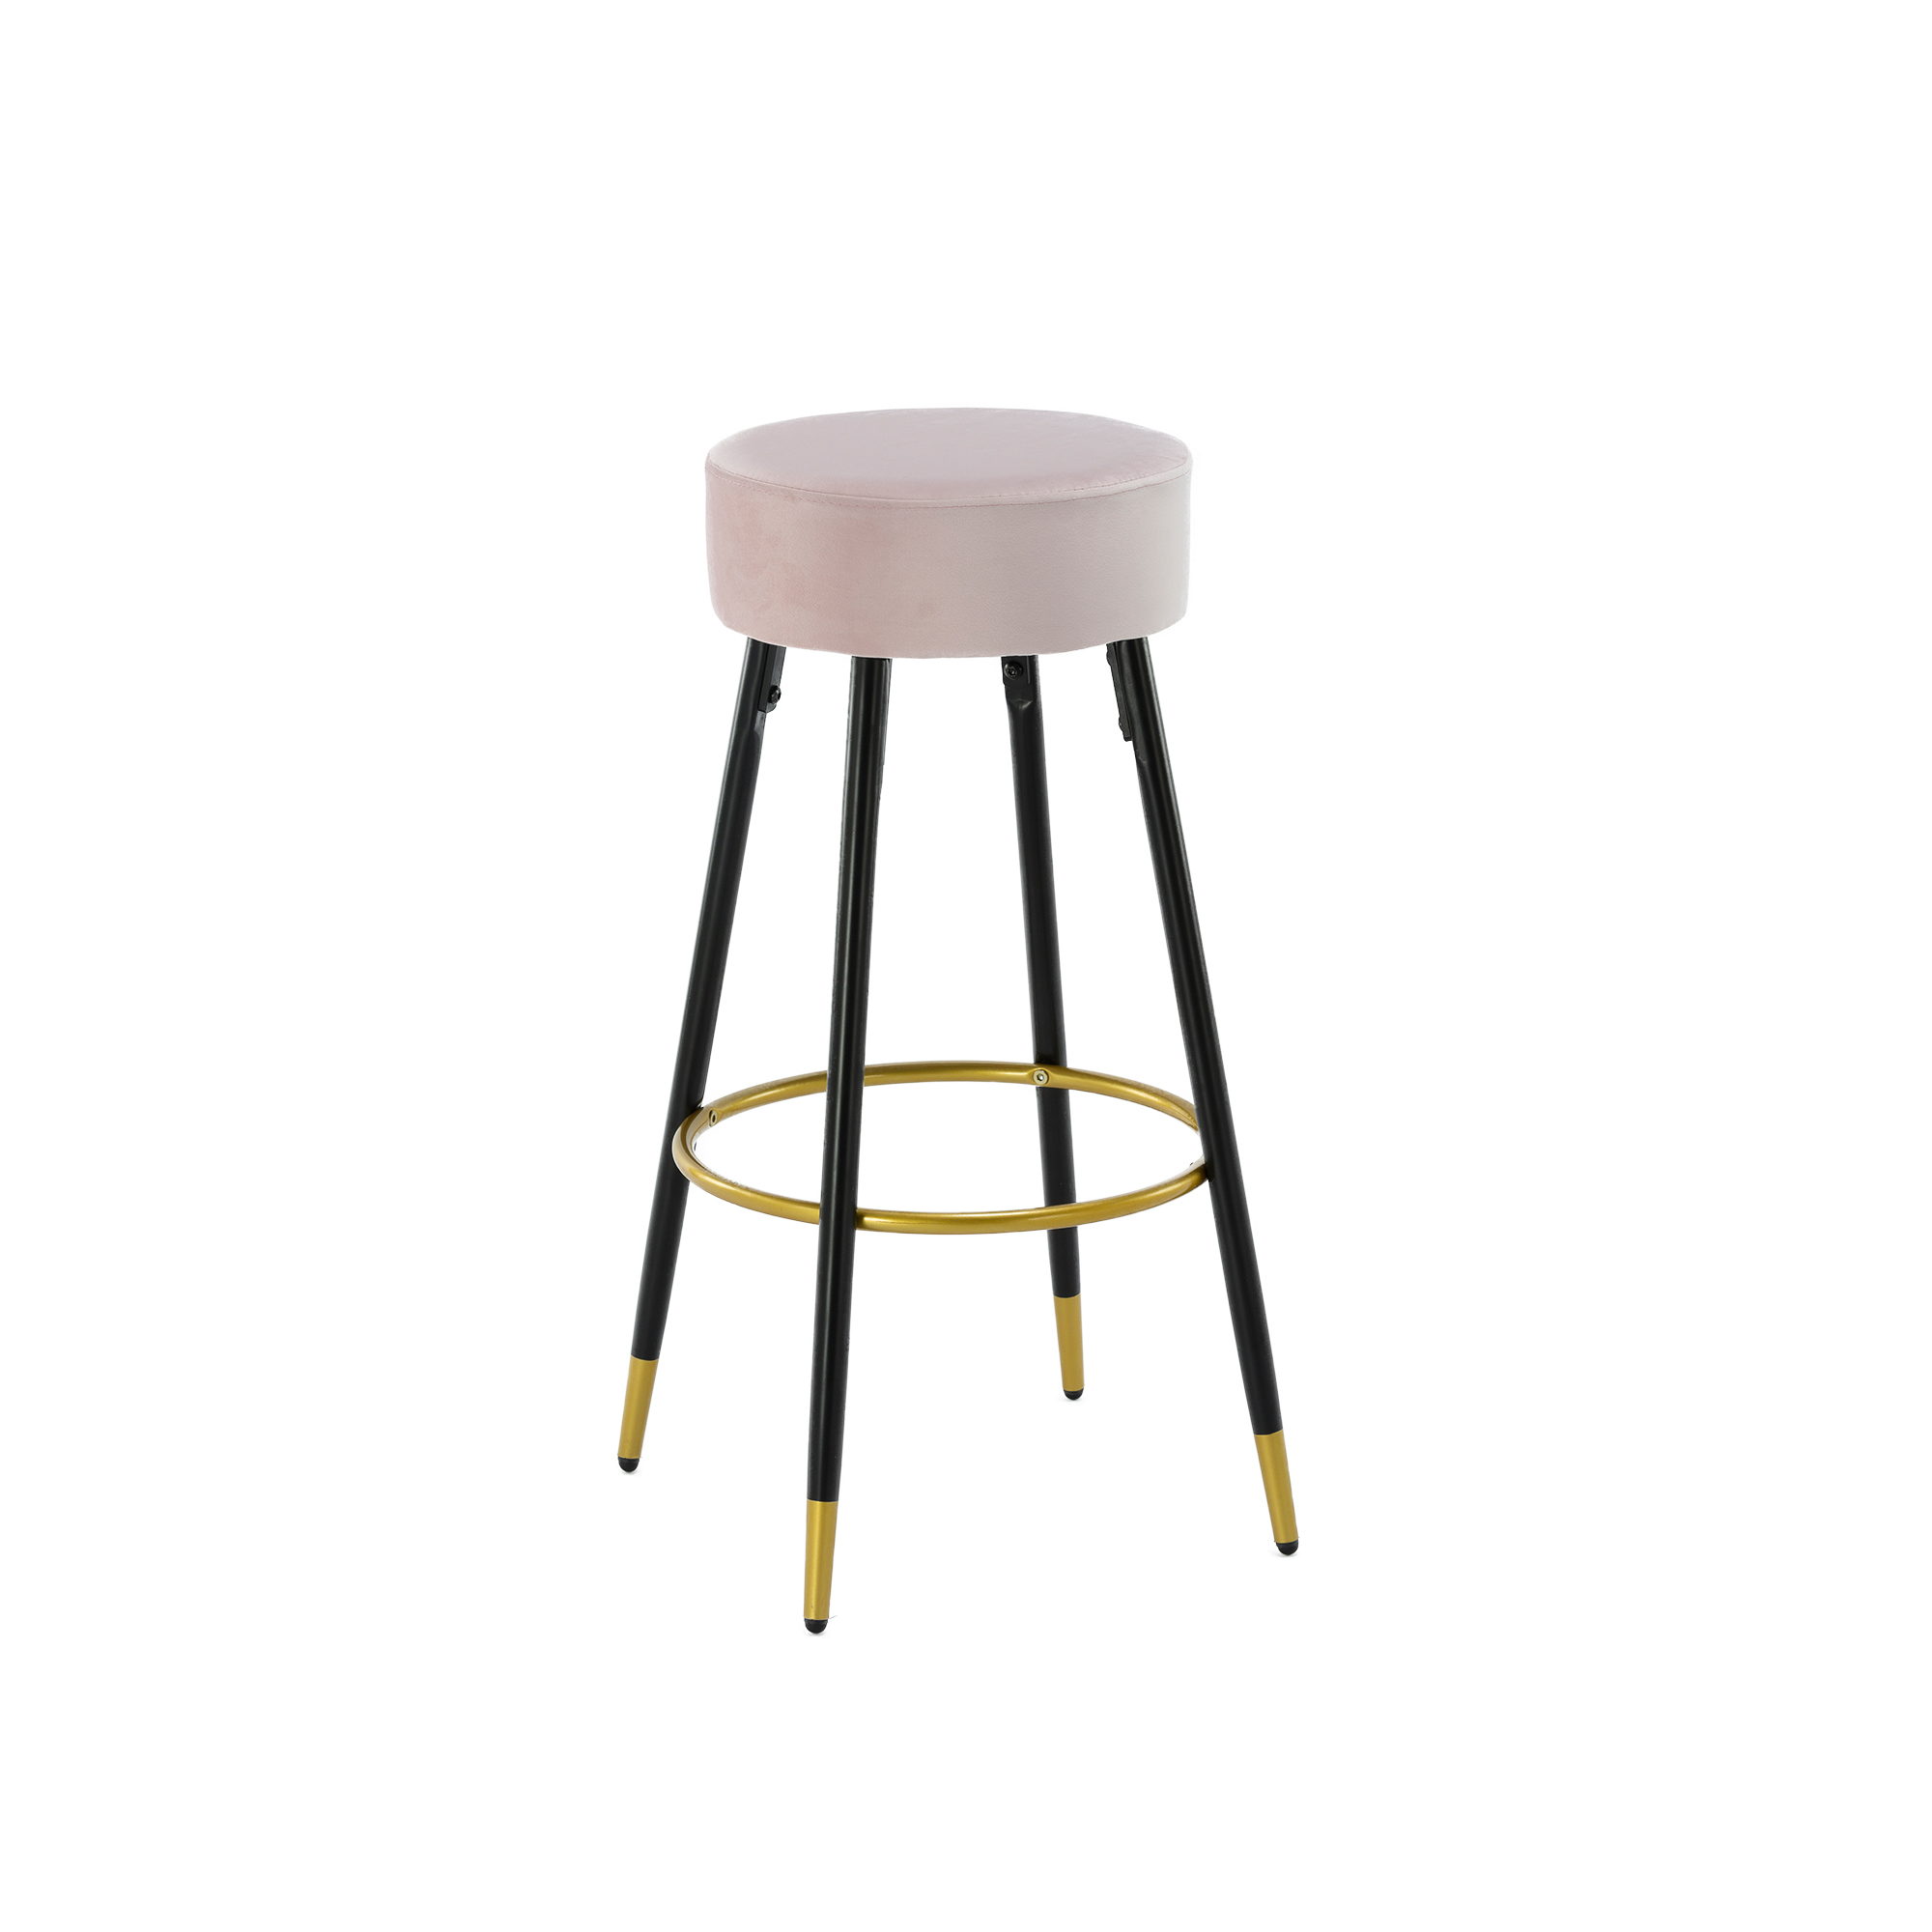 Counter Height Bar Stools Set of 2, Velvet Kitchen Stools Upholstered Dining Chair Stools 24 Inches Height with Golden Footrest for Kitchen Island Coffee Shop Bar Home Balcony,-Boyel Living